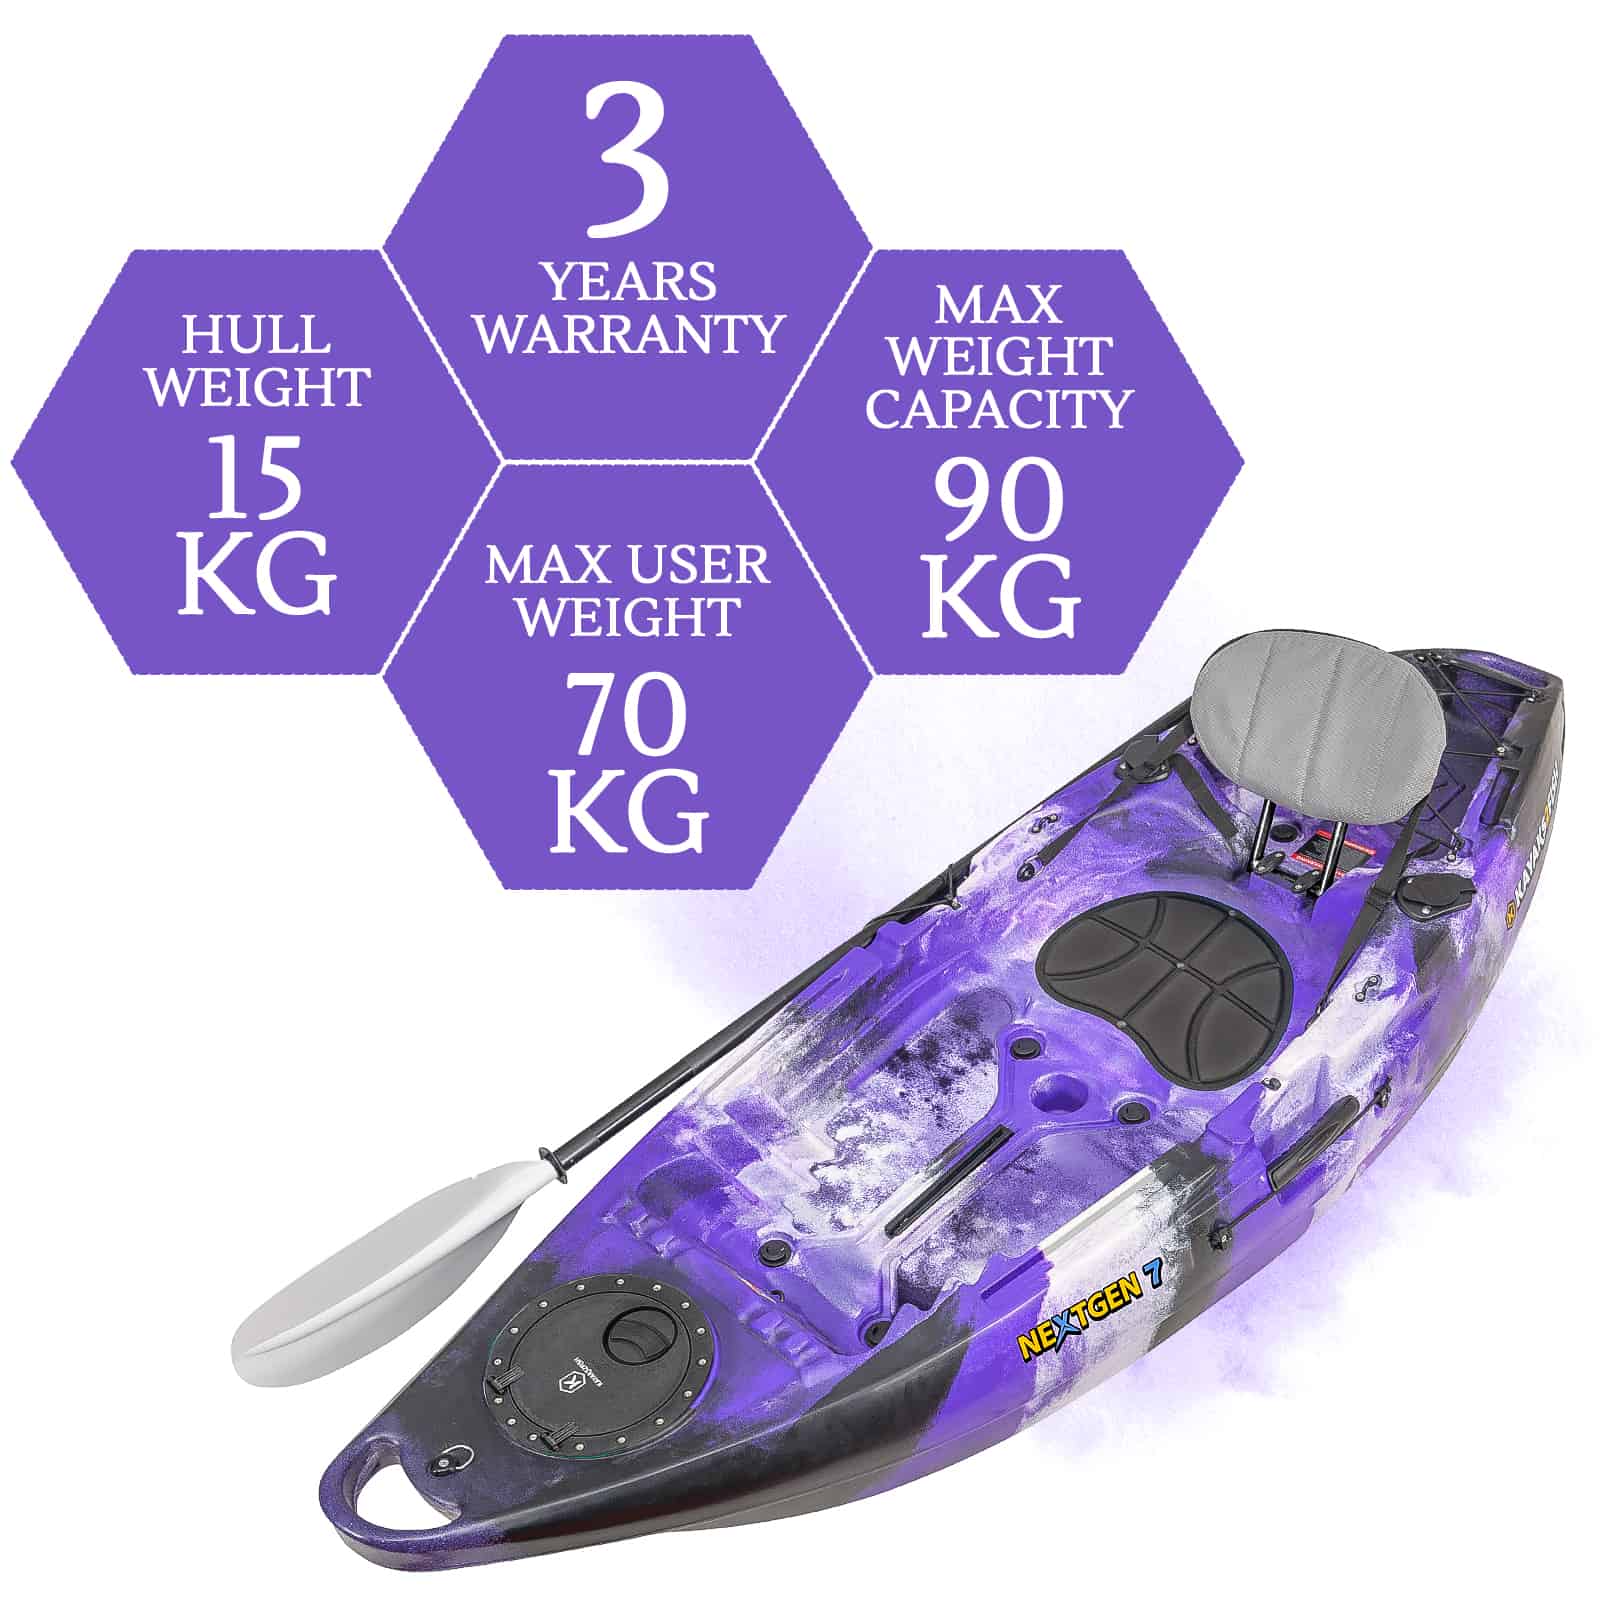 NGR-07-PURPLECAMO specifications